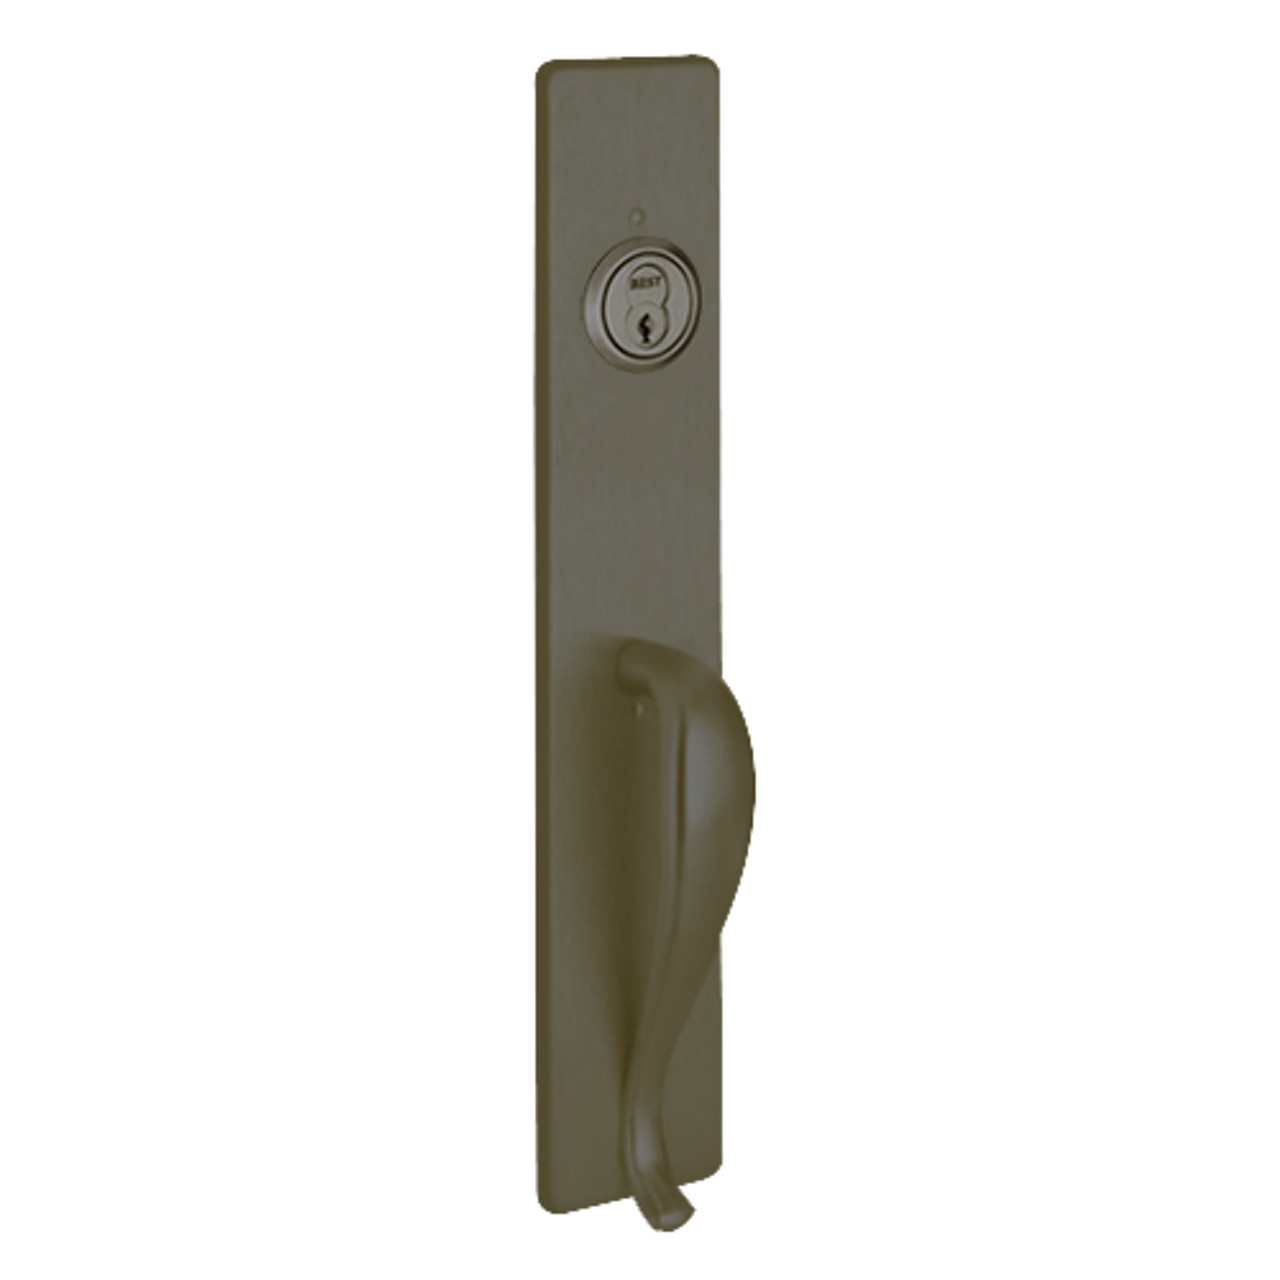 R1703B-613 PHI Key Retracts Latchbolt Retrofit Trim with B Design Pull for Apex and Olympian Series Exit Device in Oil Rubbed Bronze Finish